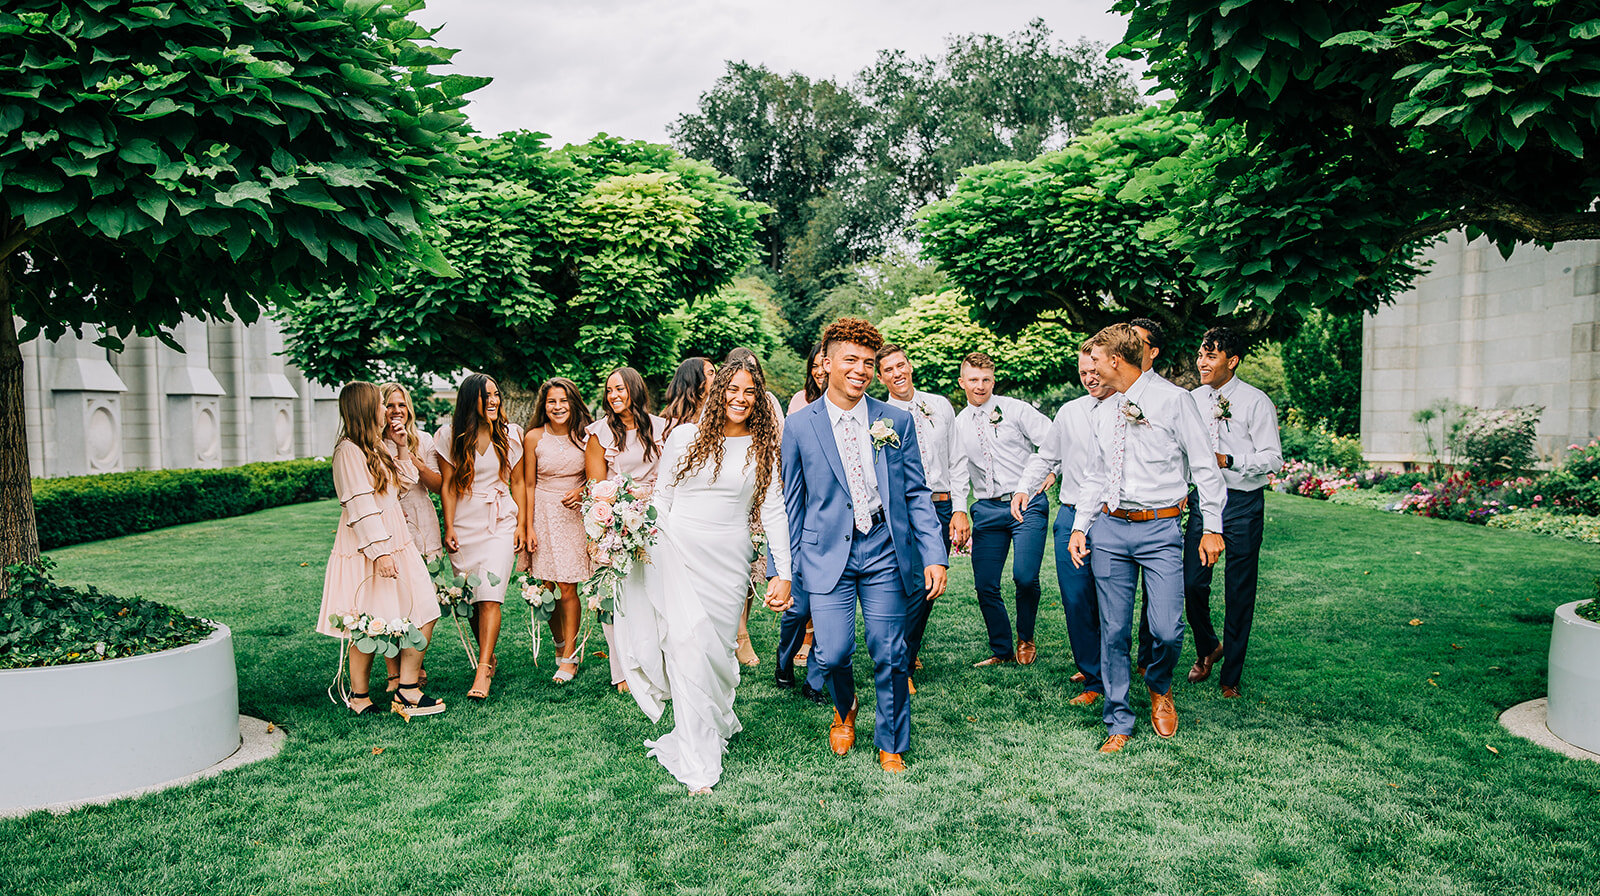  bride and groom blue suit wedding party pose ideas walking towards the camera groomsman white button up blue grey pants bridesmaid in blush pink dress friends and family new husband and wife wedding party photos professional photography for your wed